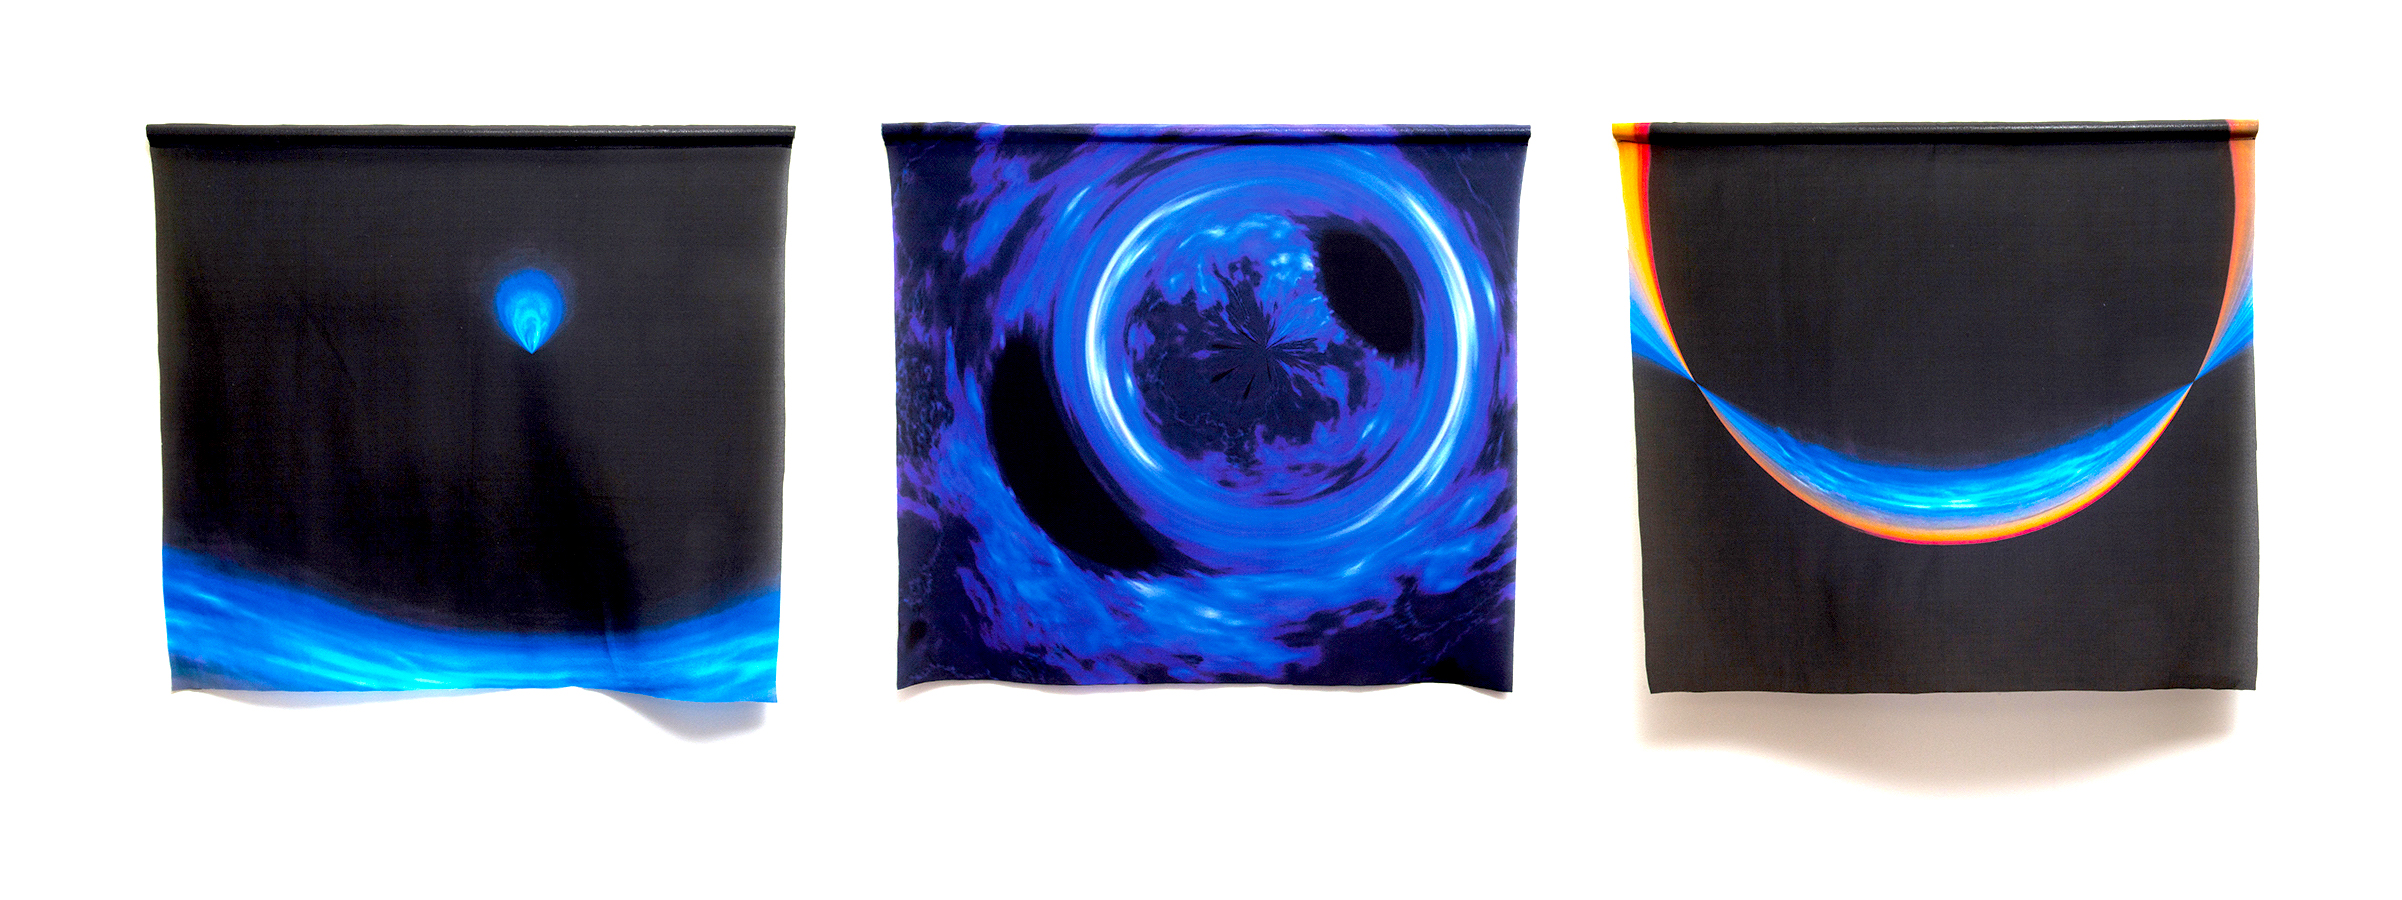 1. Noctilucent Canary Series I, II, III